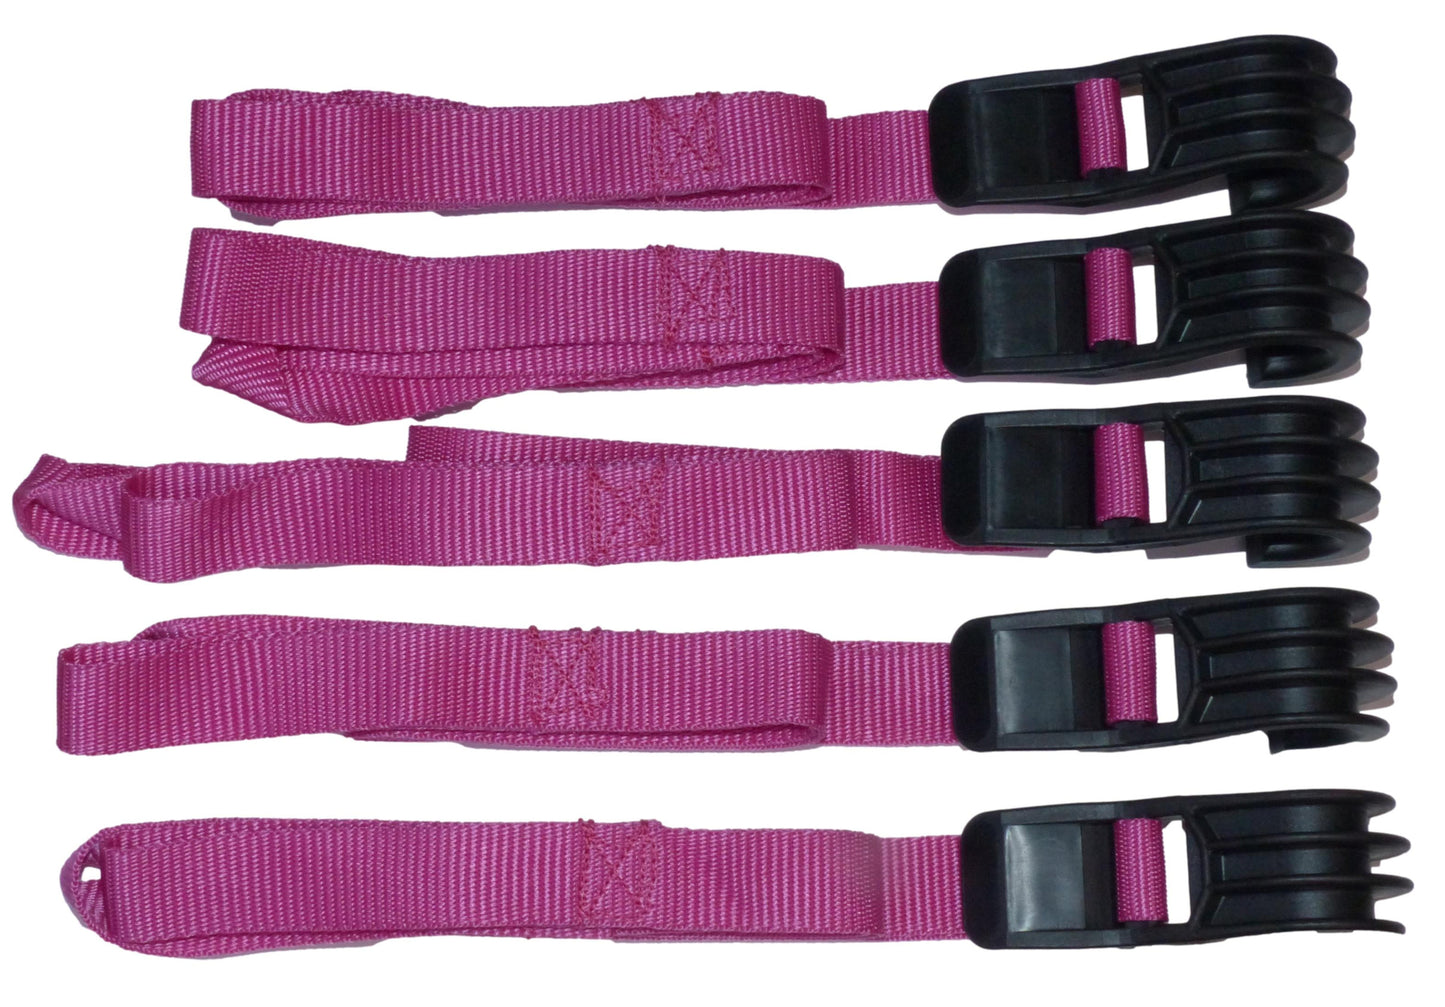 Benristraps Roll Cage, Trolley, Pallet Straps (Pack of 5) in pink